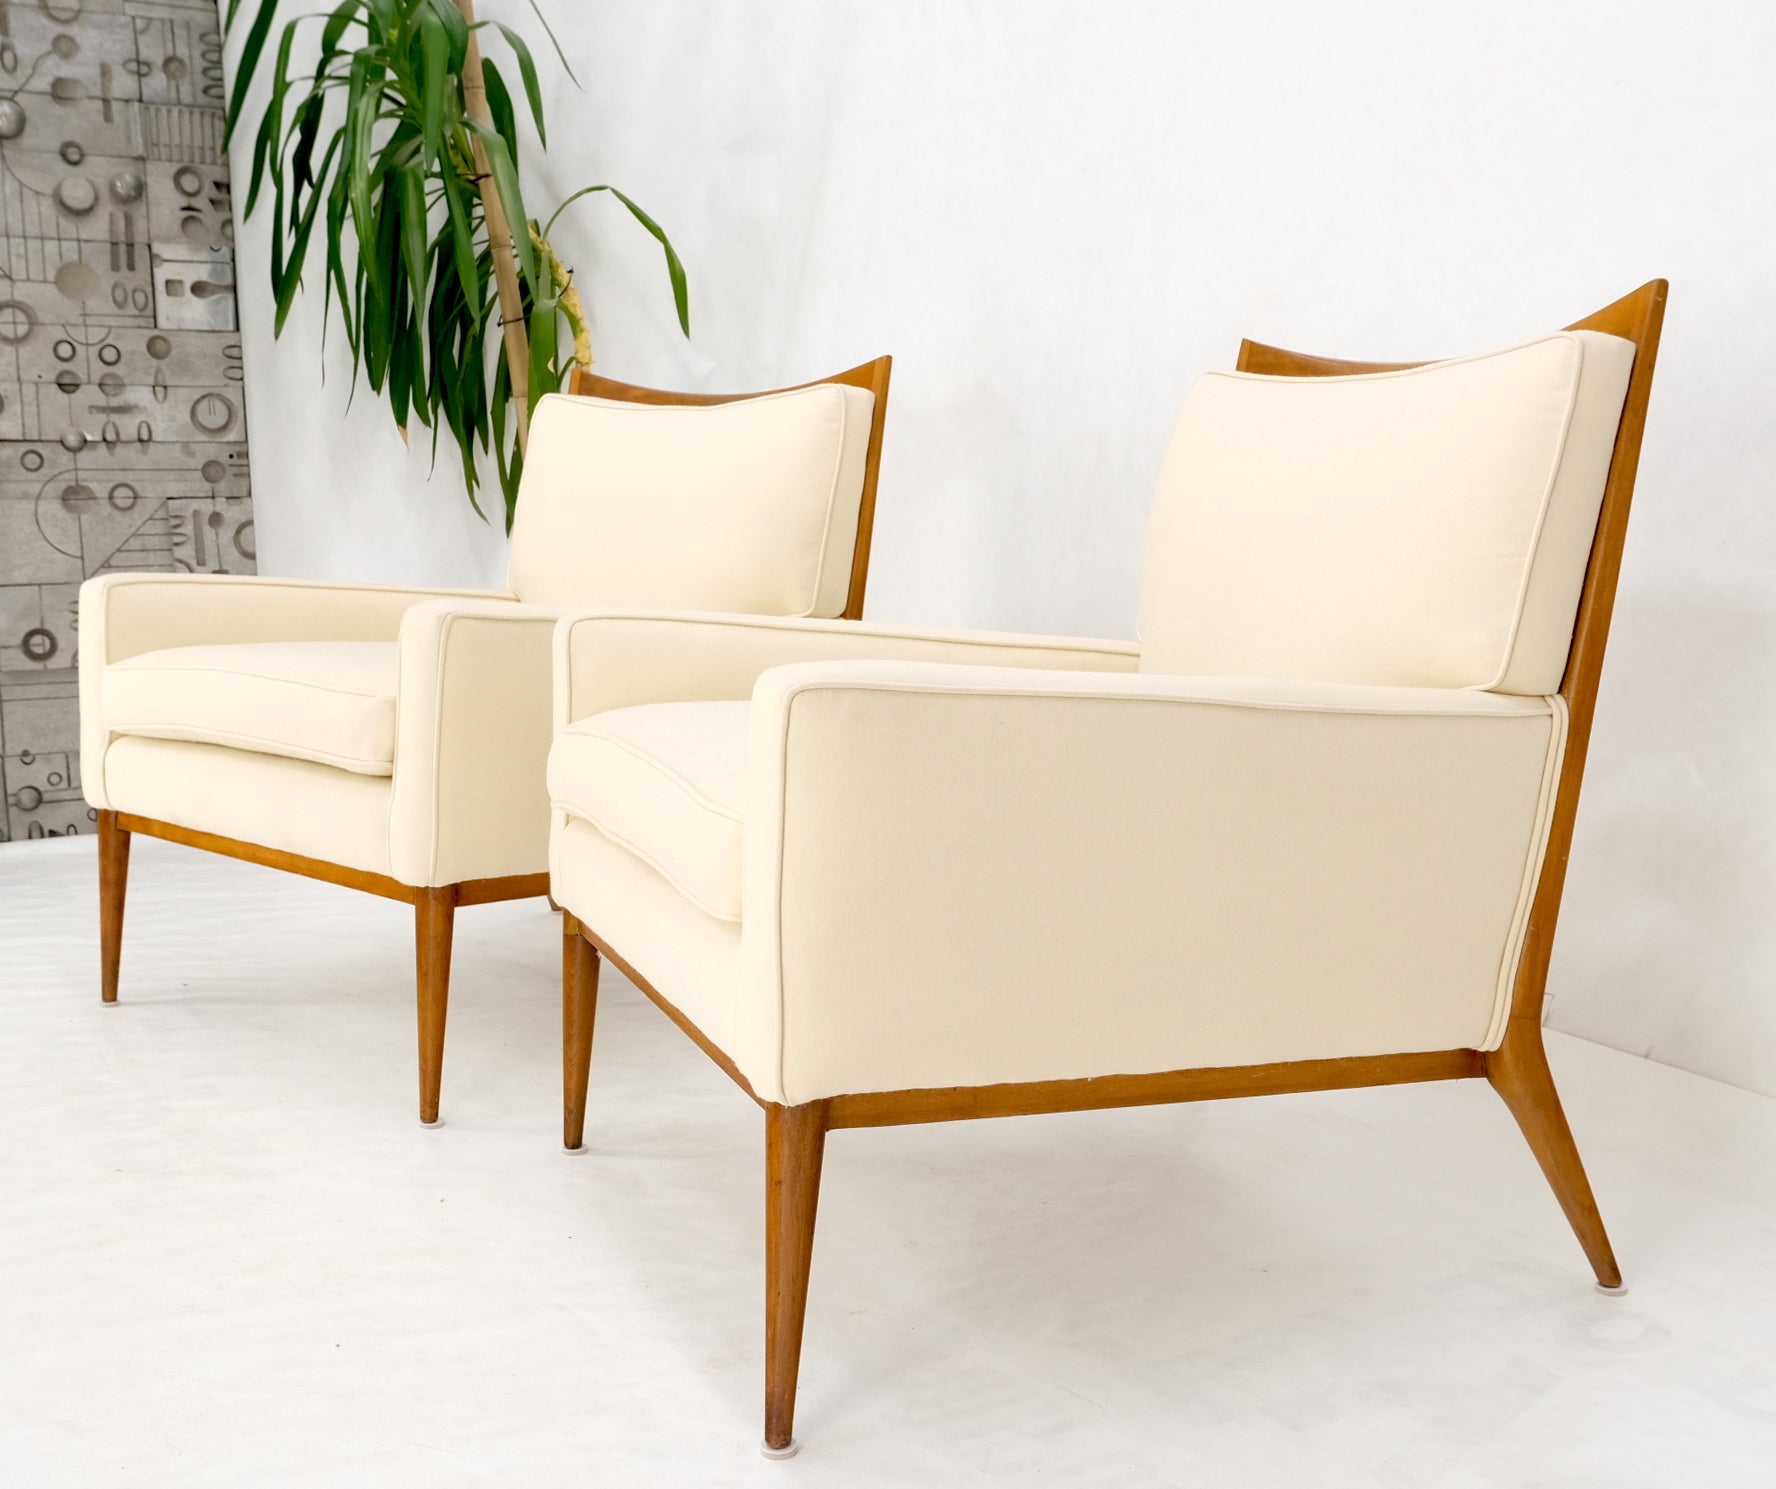 Pair of Mid Century Modern McCobb Lounge Chairs Newly Upholstered in Cream Virgin Wool Fabric Stunning!